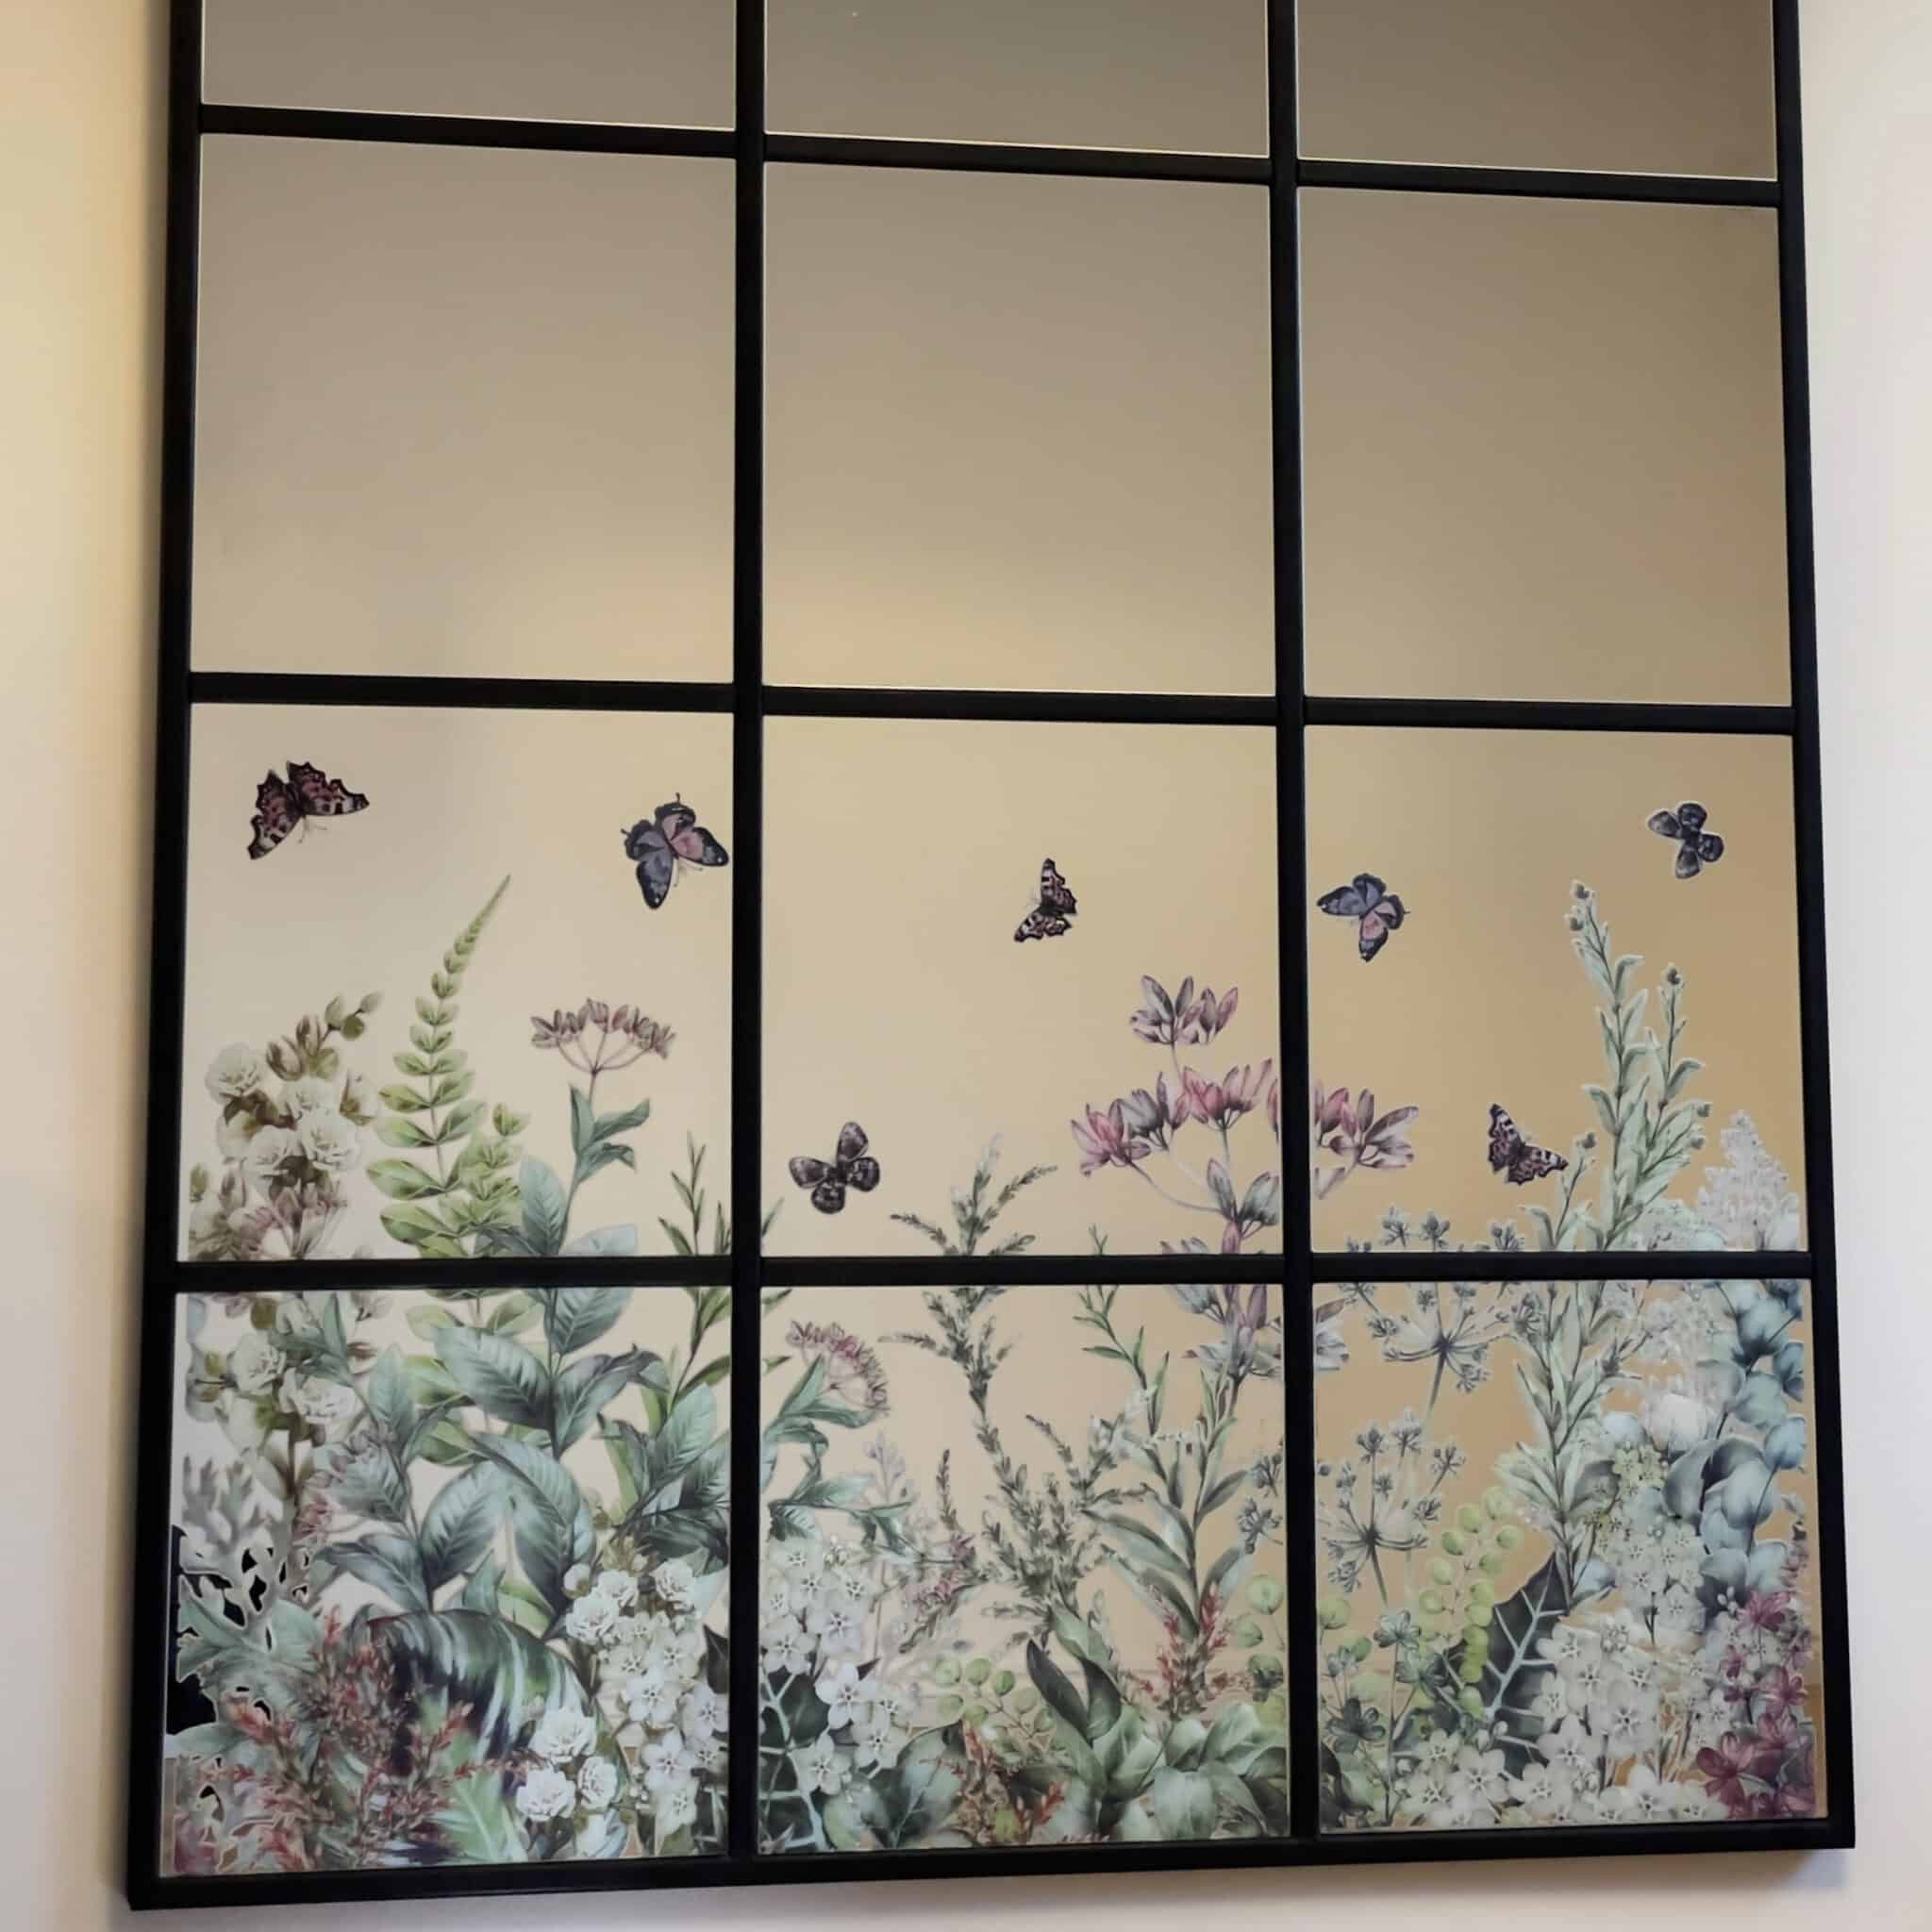 The final diy ikea mirror created with IKEA mirrors and floral transfer